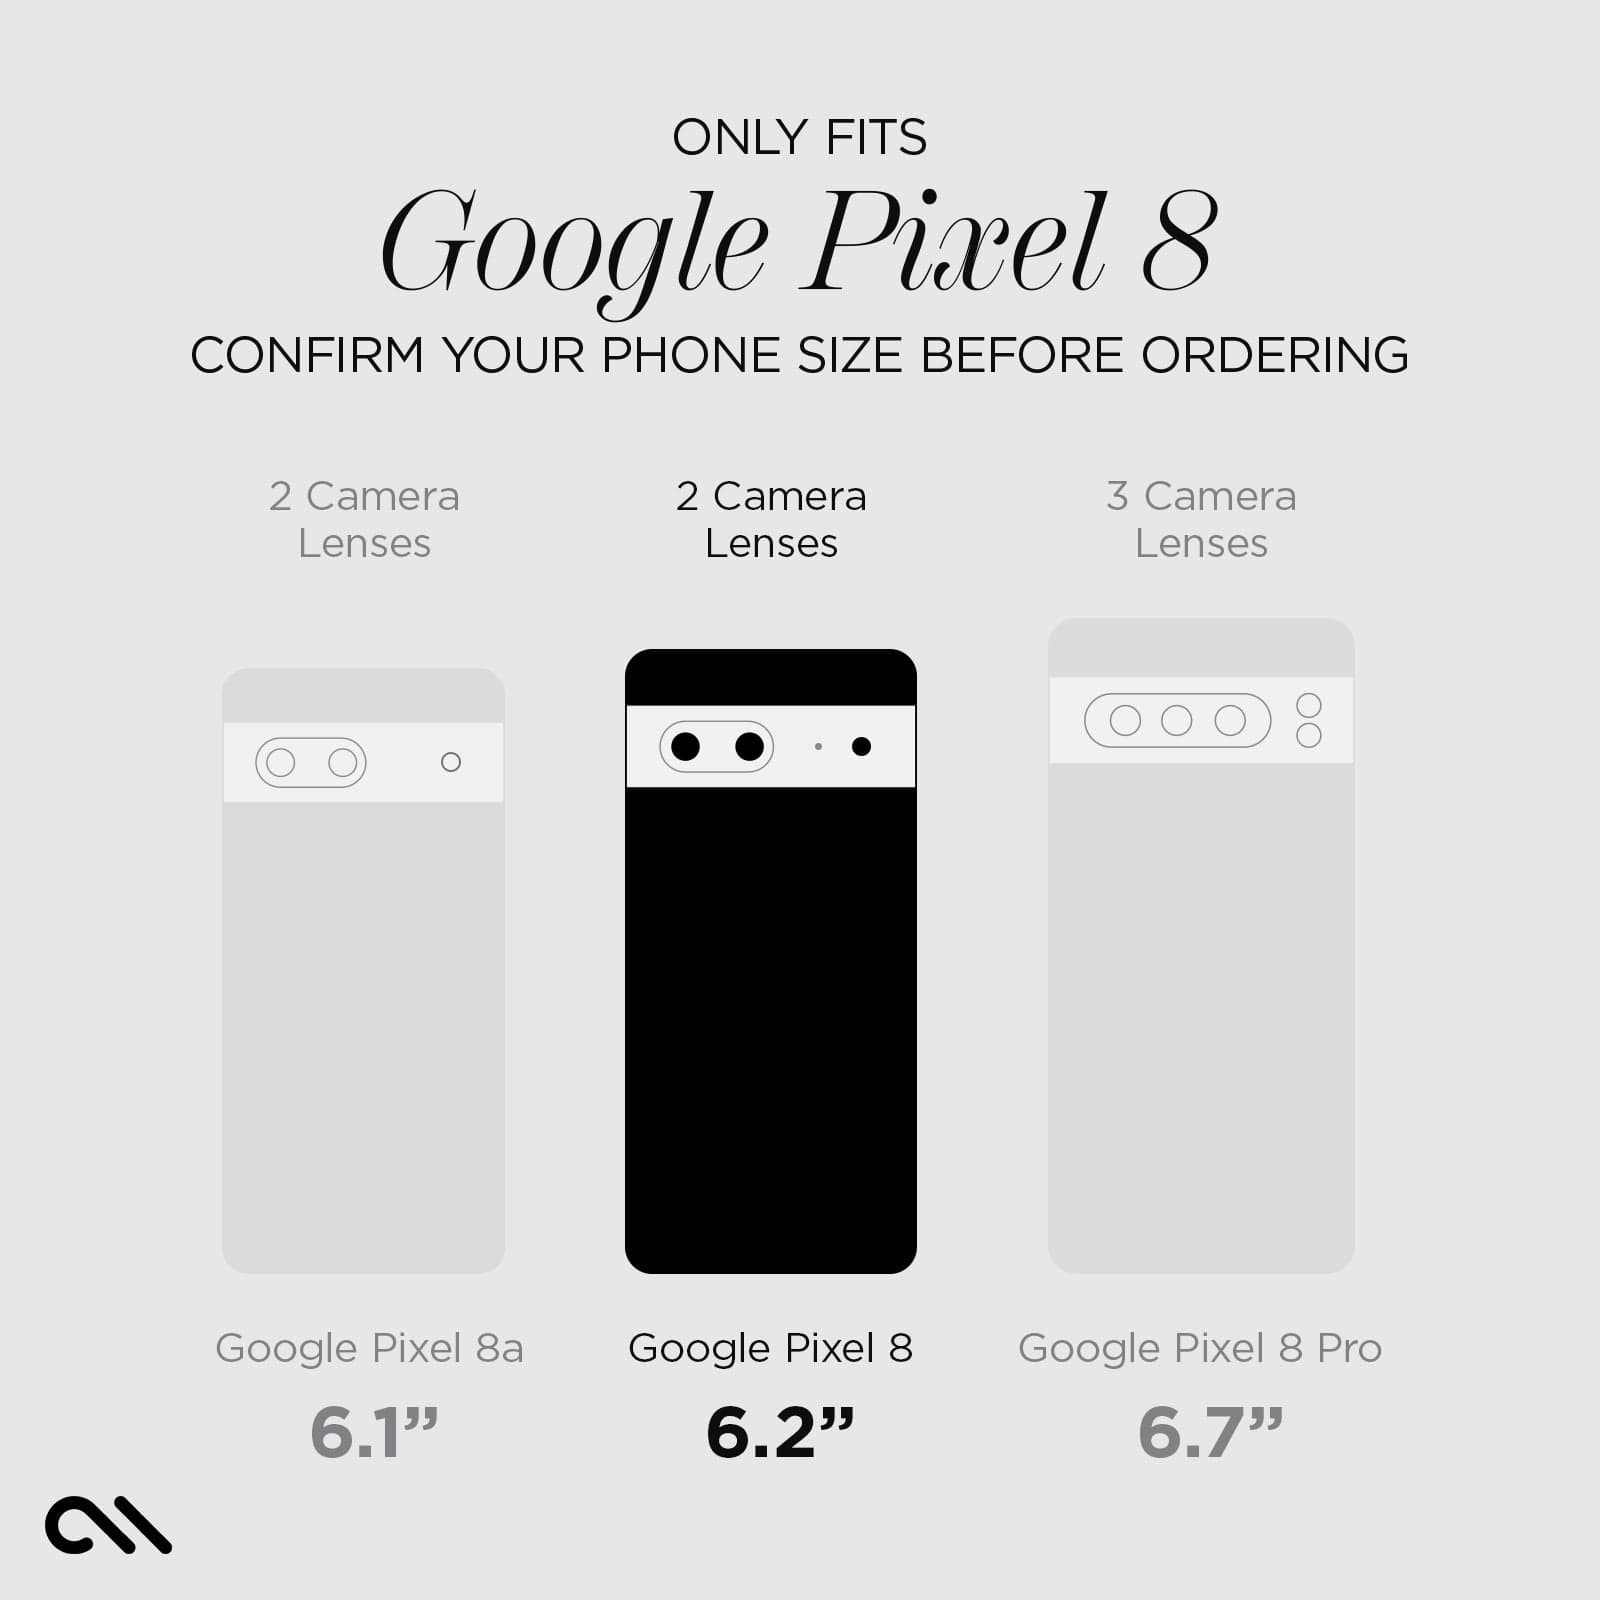 ONLY FITS GOOGLE PIXEL 8. CONFIRM YOUR PHONE SIZE BEFORE ORDERING